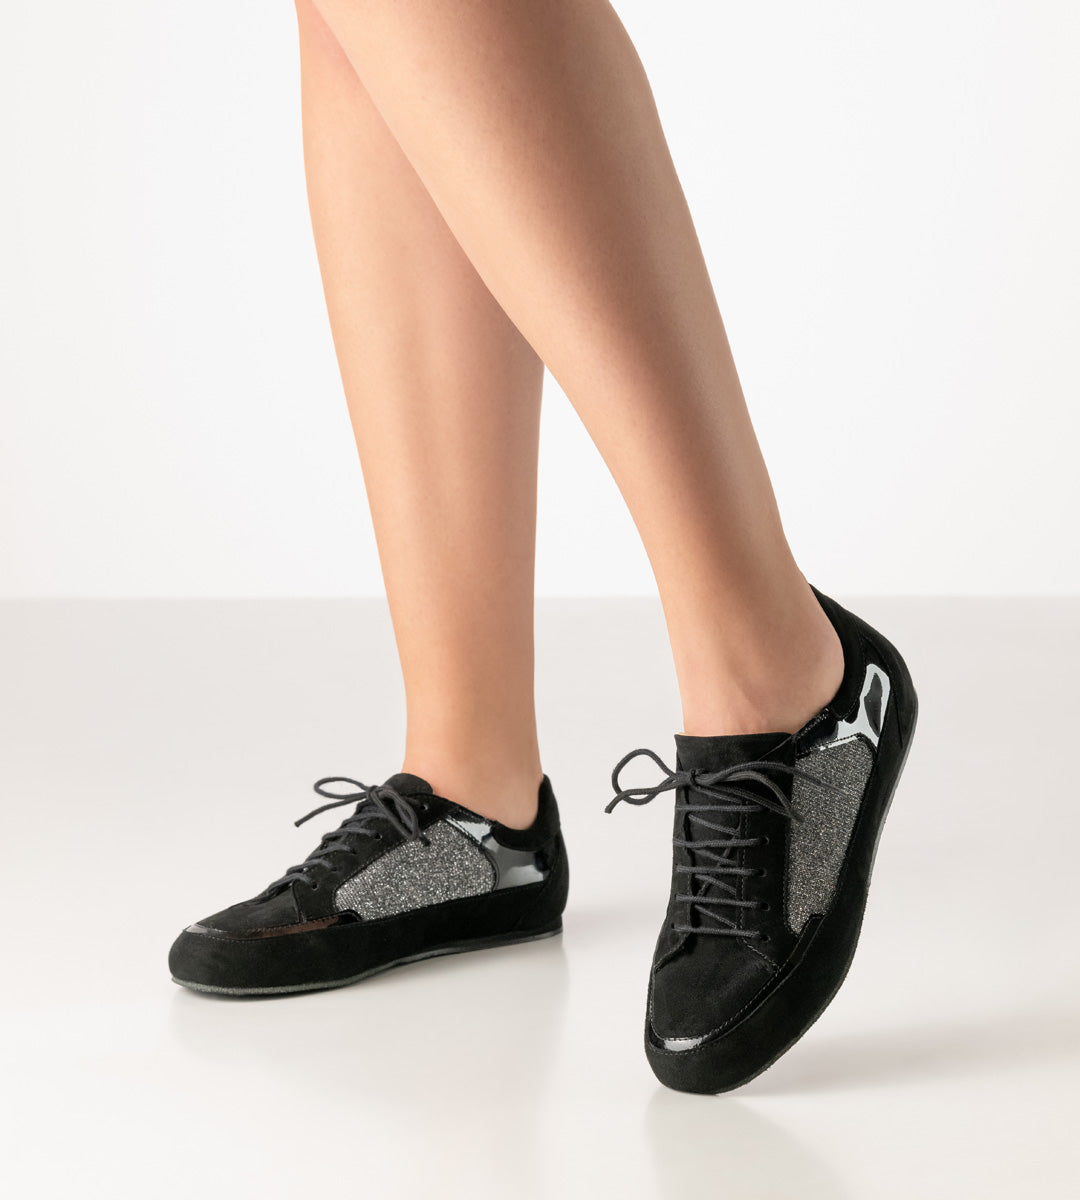 Werner Kern Carol Ladies Nappa Leather and Brocade Dance Sneakers Available in White and Black